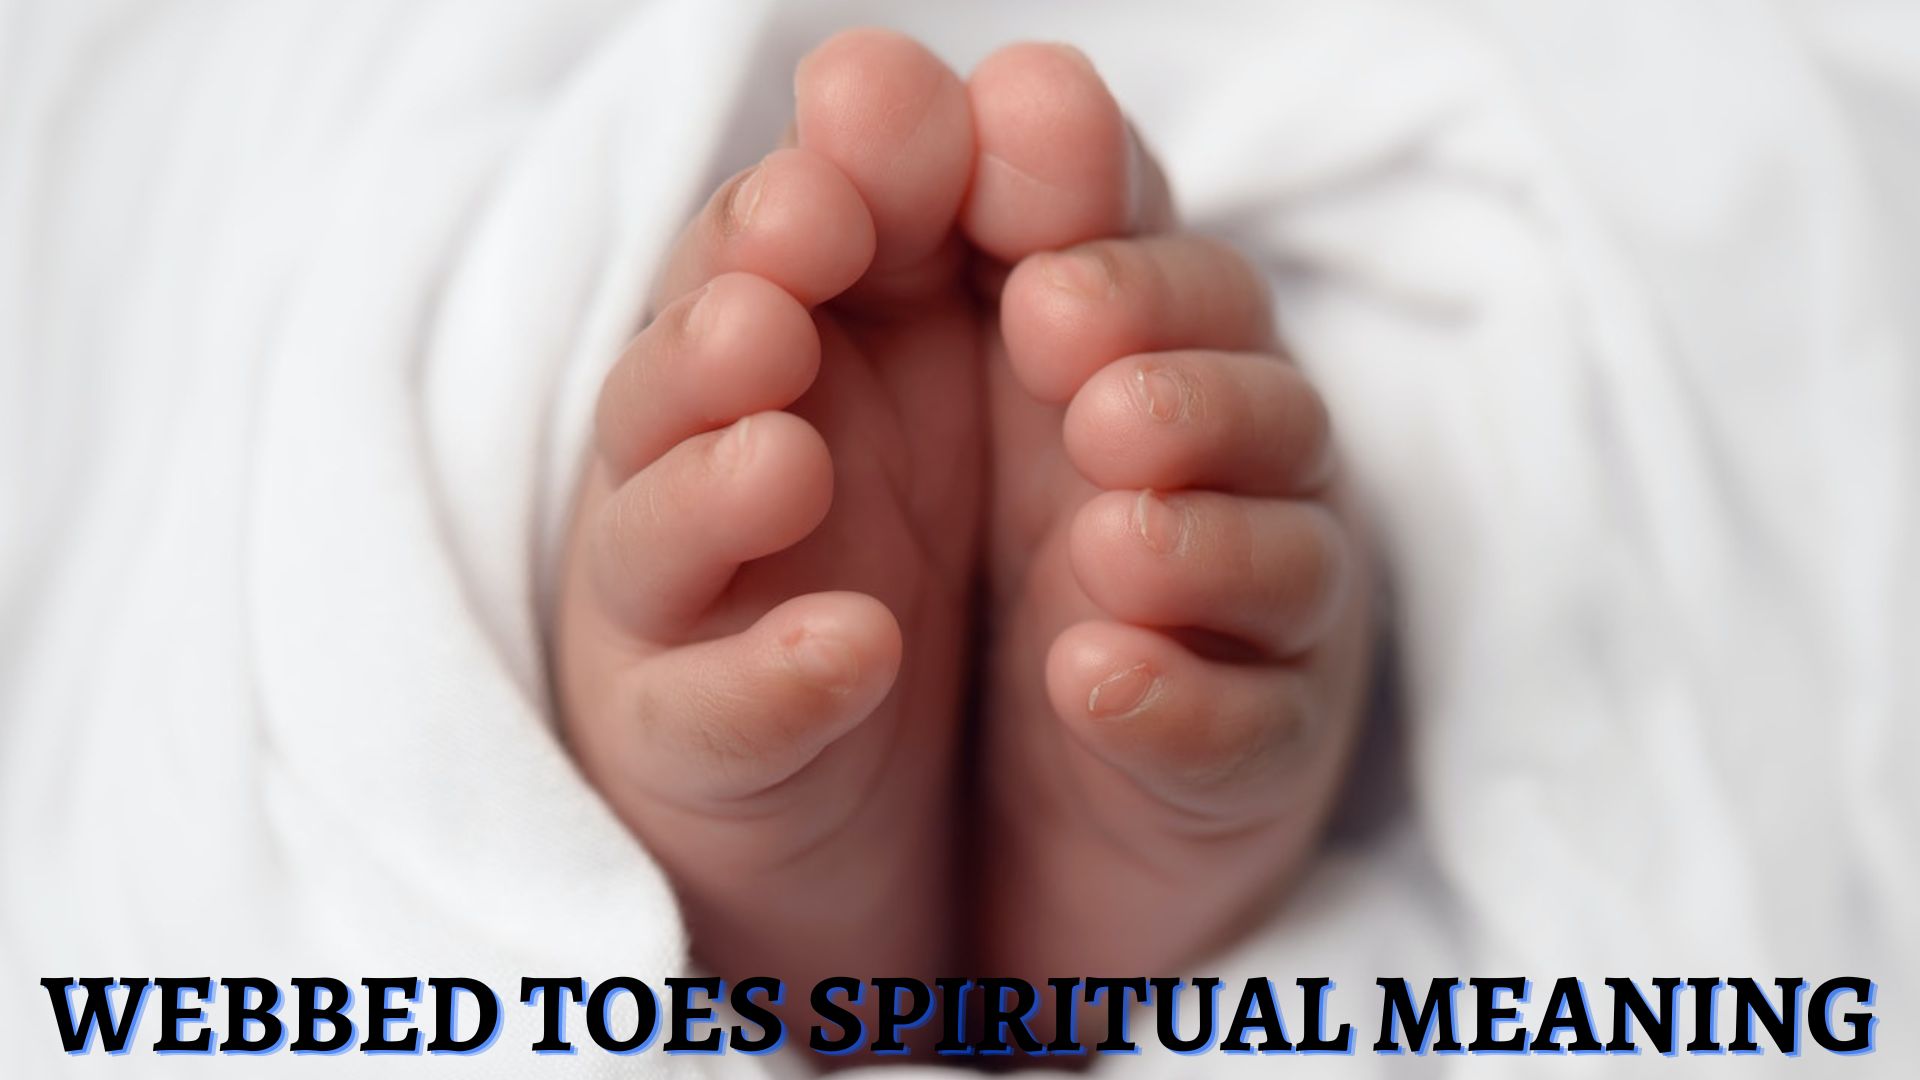 Webbed Toes Spiritual Meaning - It Is Our Responsibility To Take Charge Of Our Lives